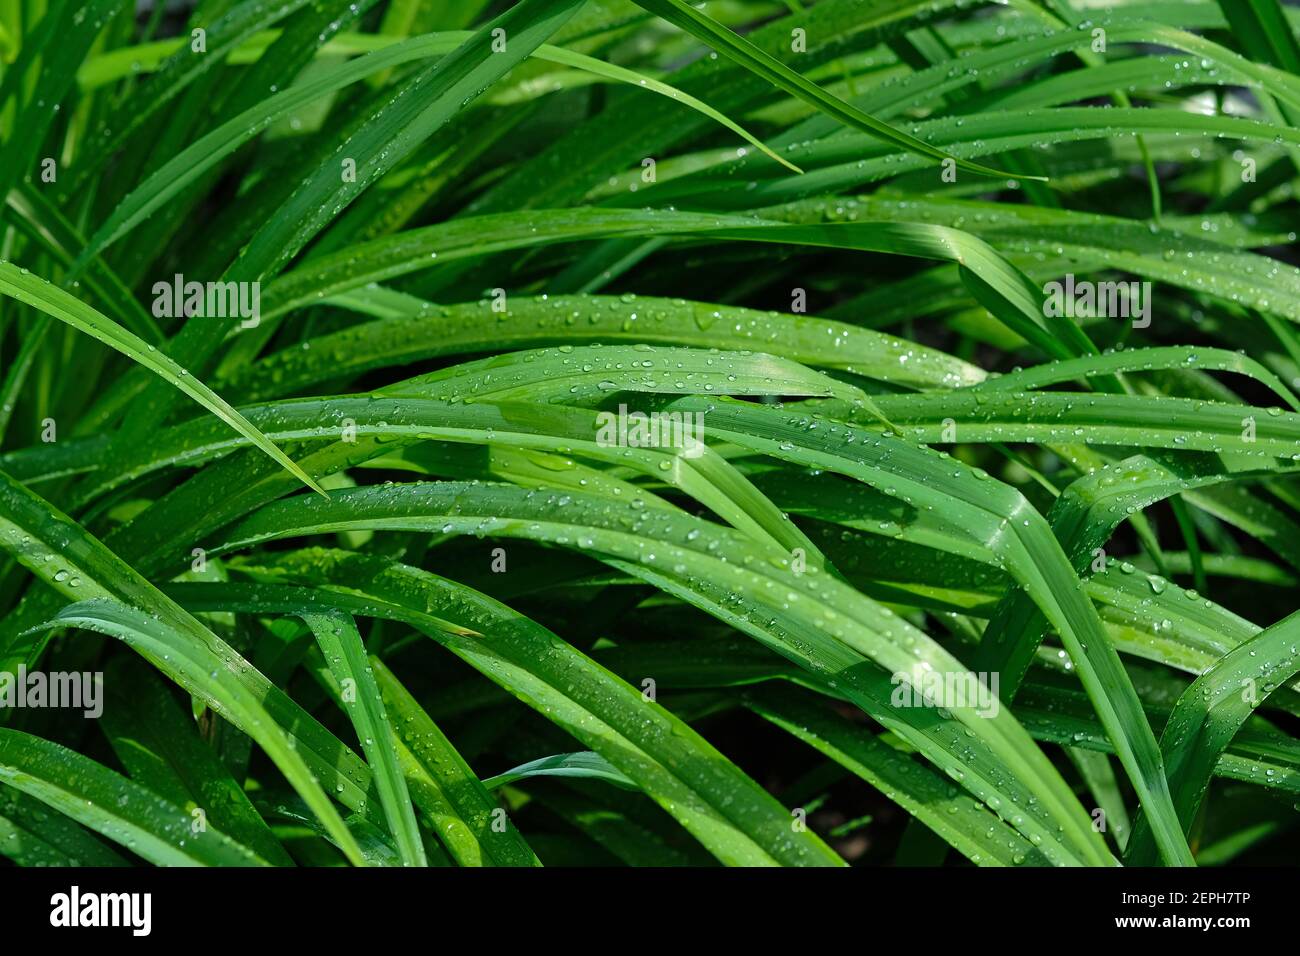 Lily leaves background. Green leaves with water droplets shimmering in the sun. elongated leaves, bush in the garden. Green day lily bush without flow Stock Photo